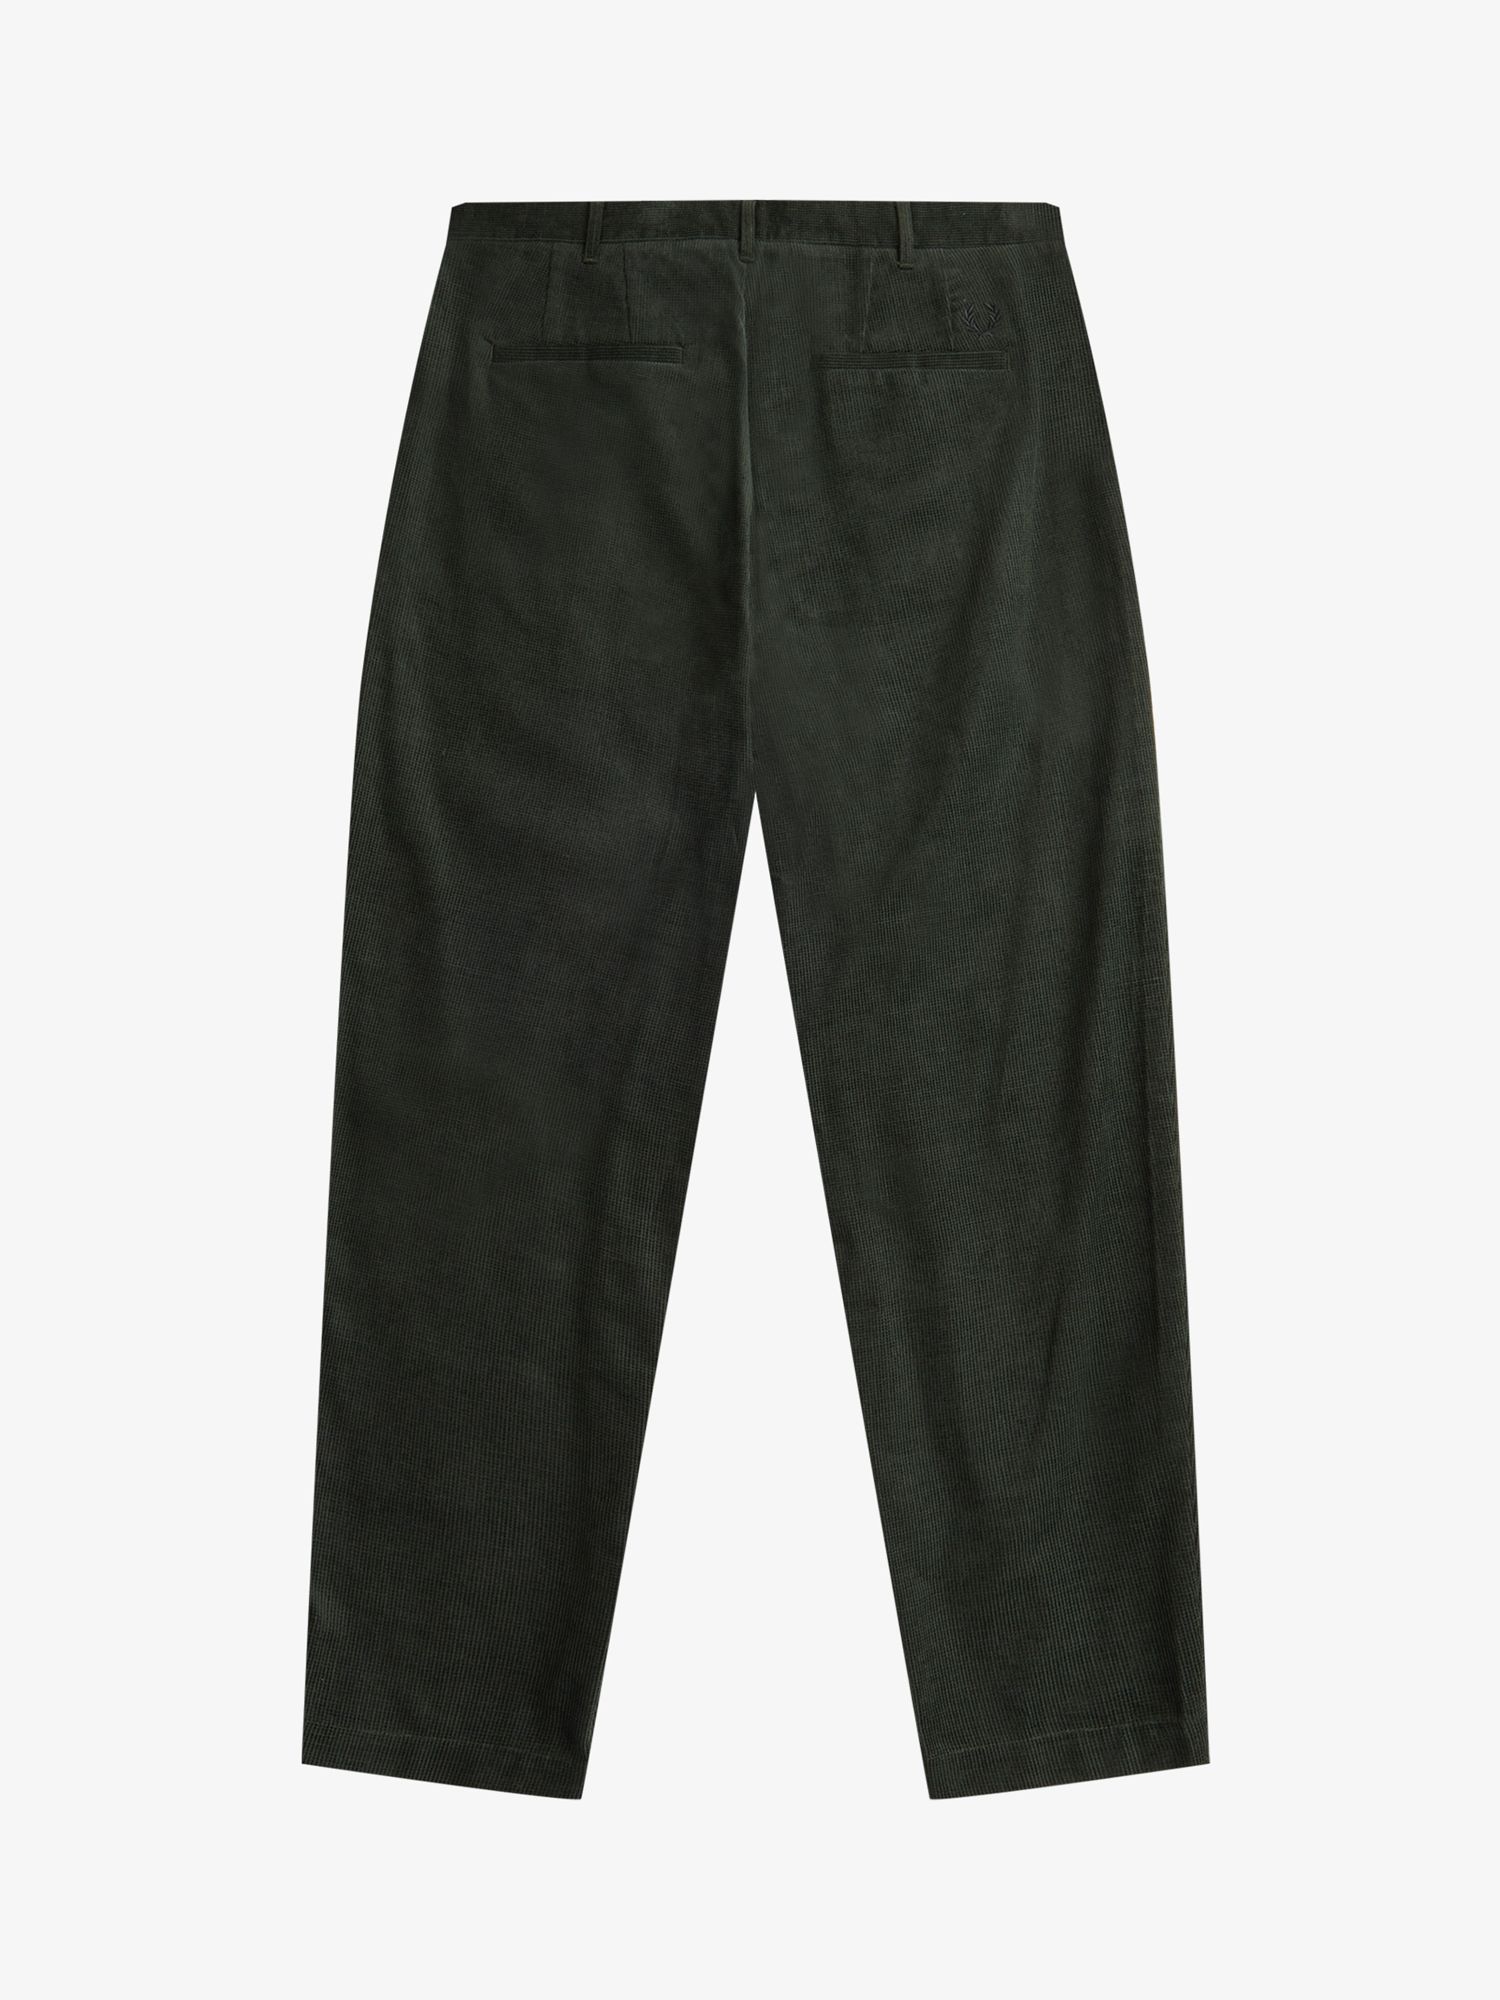 Fred Perry Waffle Cord Tapered Trousers at John Lewis & Partners